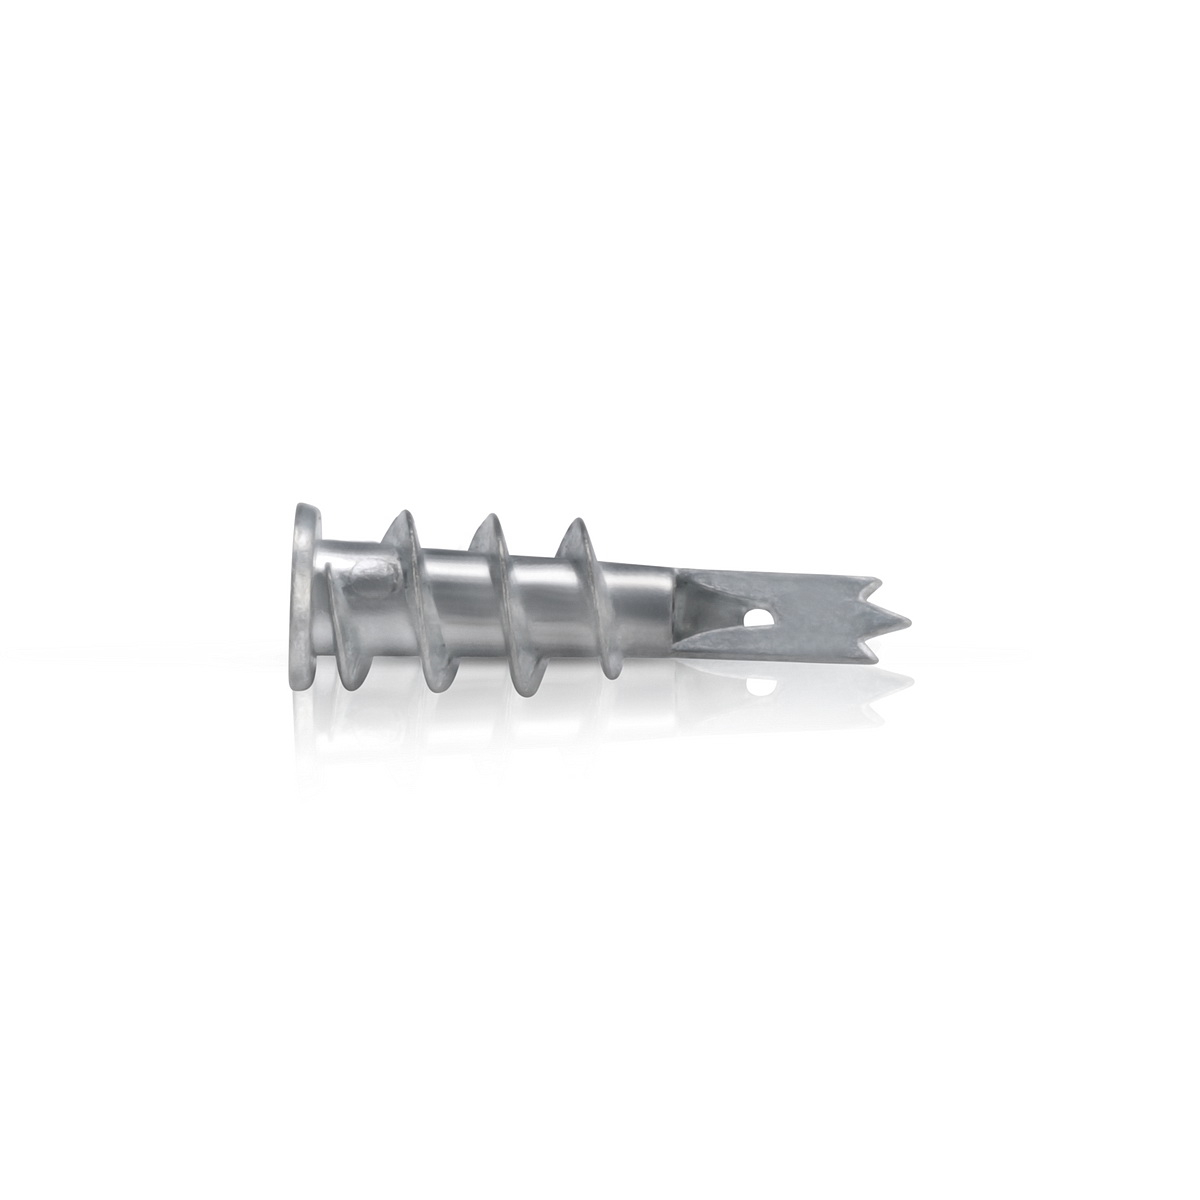 Cost Effective Large Zinc Speed Anchor for #8 Screw for Drywall